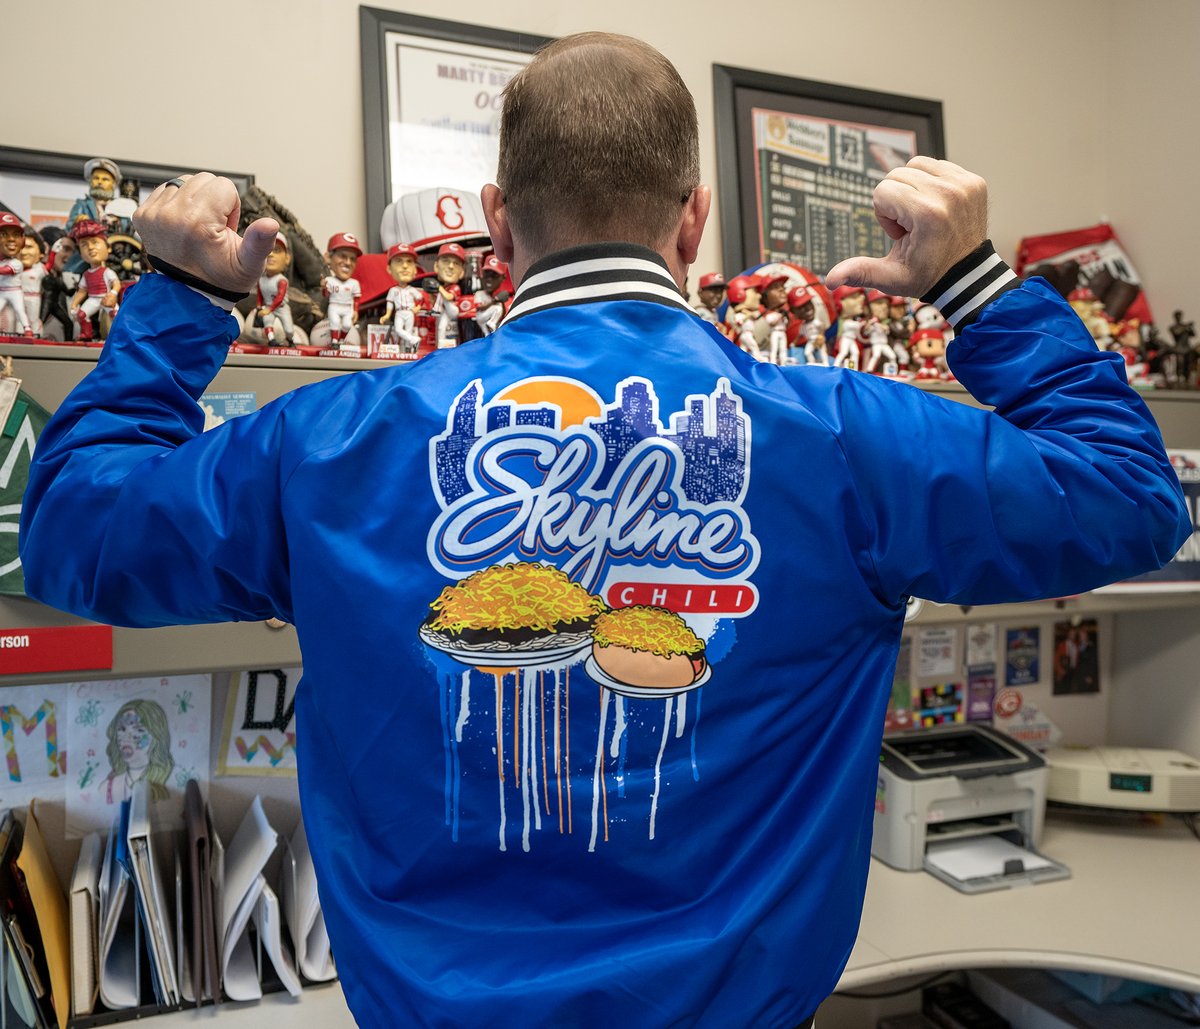 Happy National Chili Day! You know we'll be celebrating at Skyline tonight for dinner. You can get one of these retro jackets at skylinechiliretail.com #SkylineParter #NationalChiliDay @Skyline_Chili